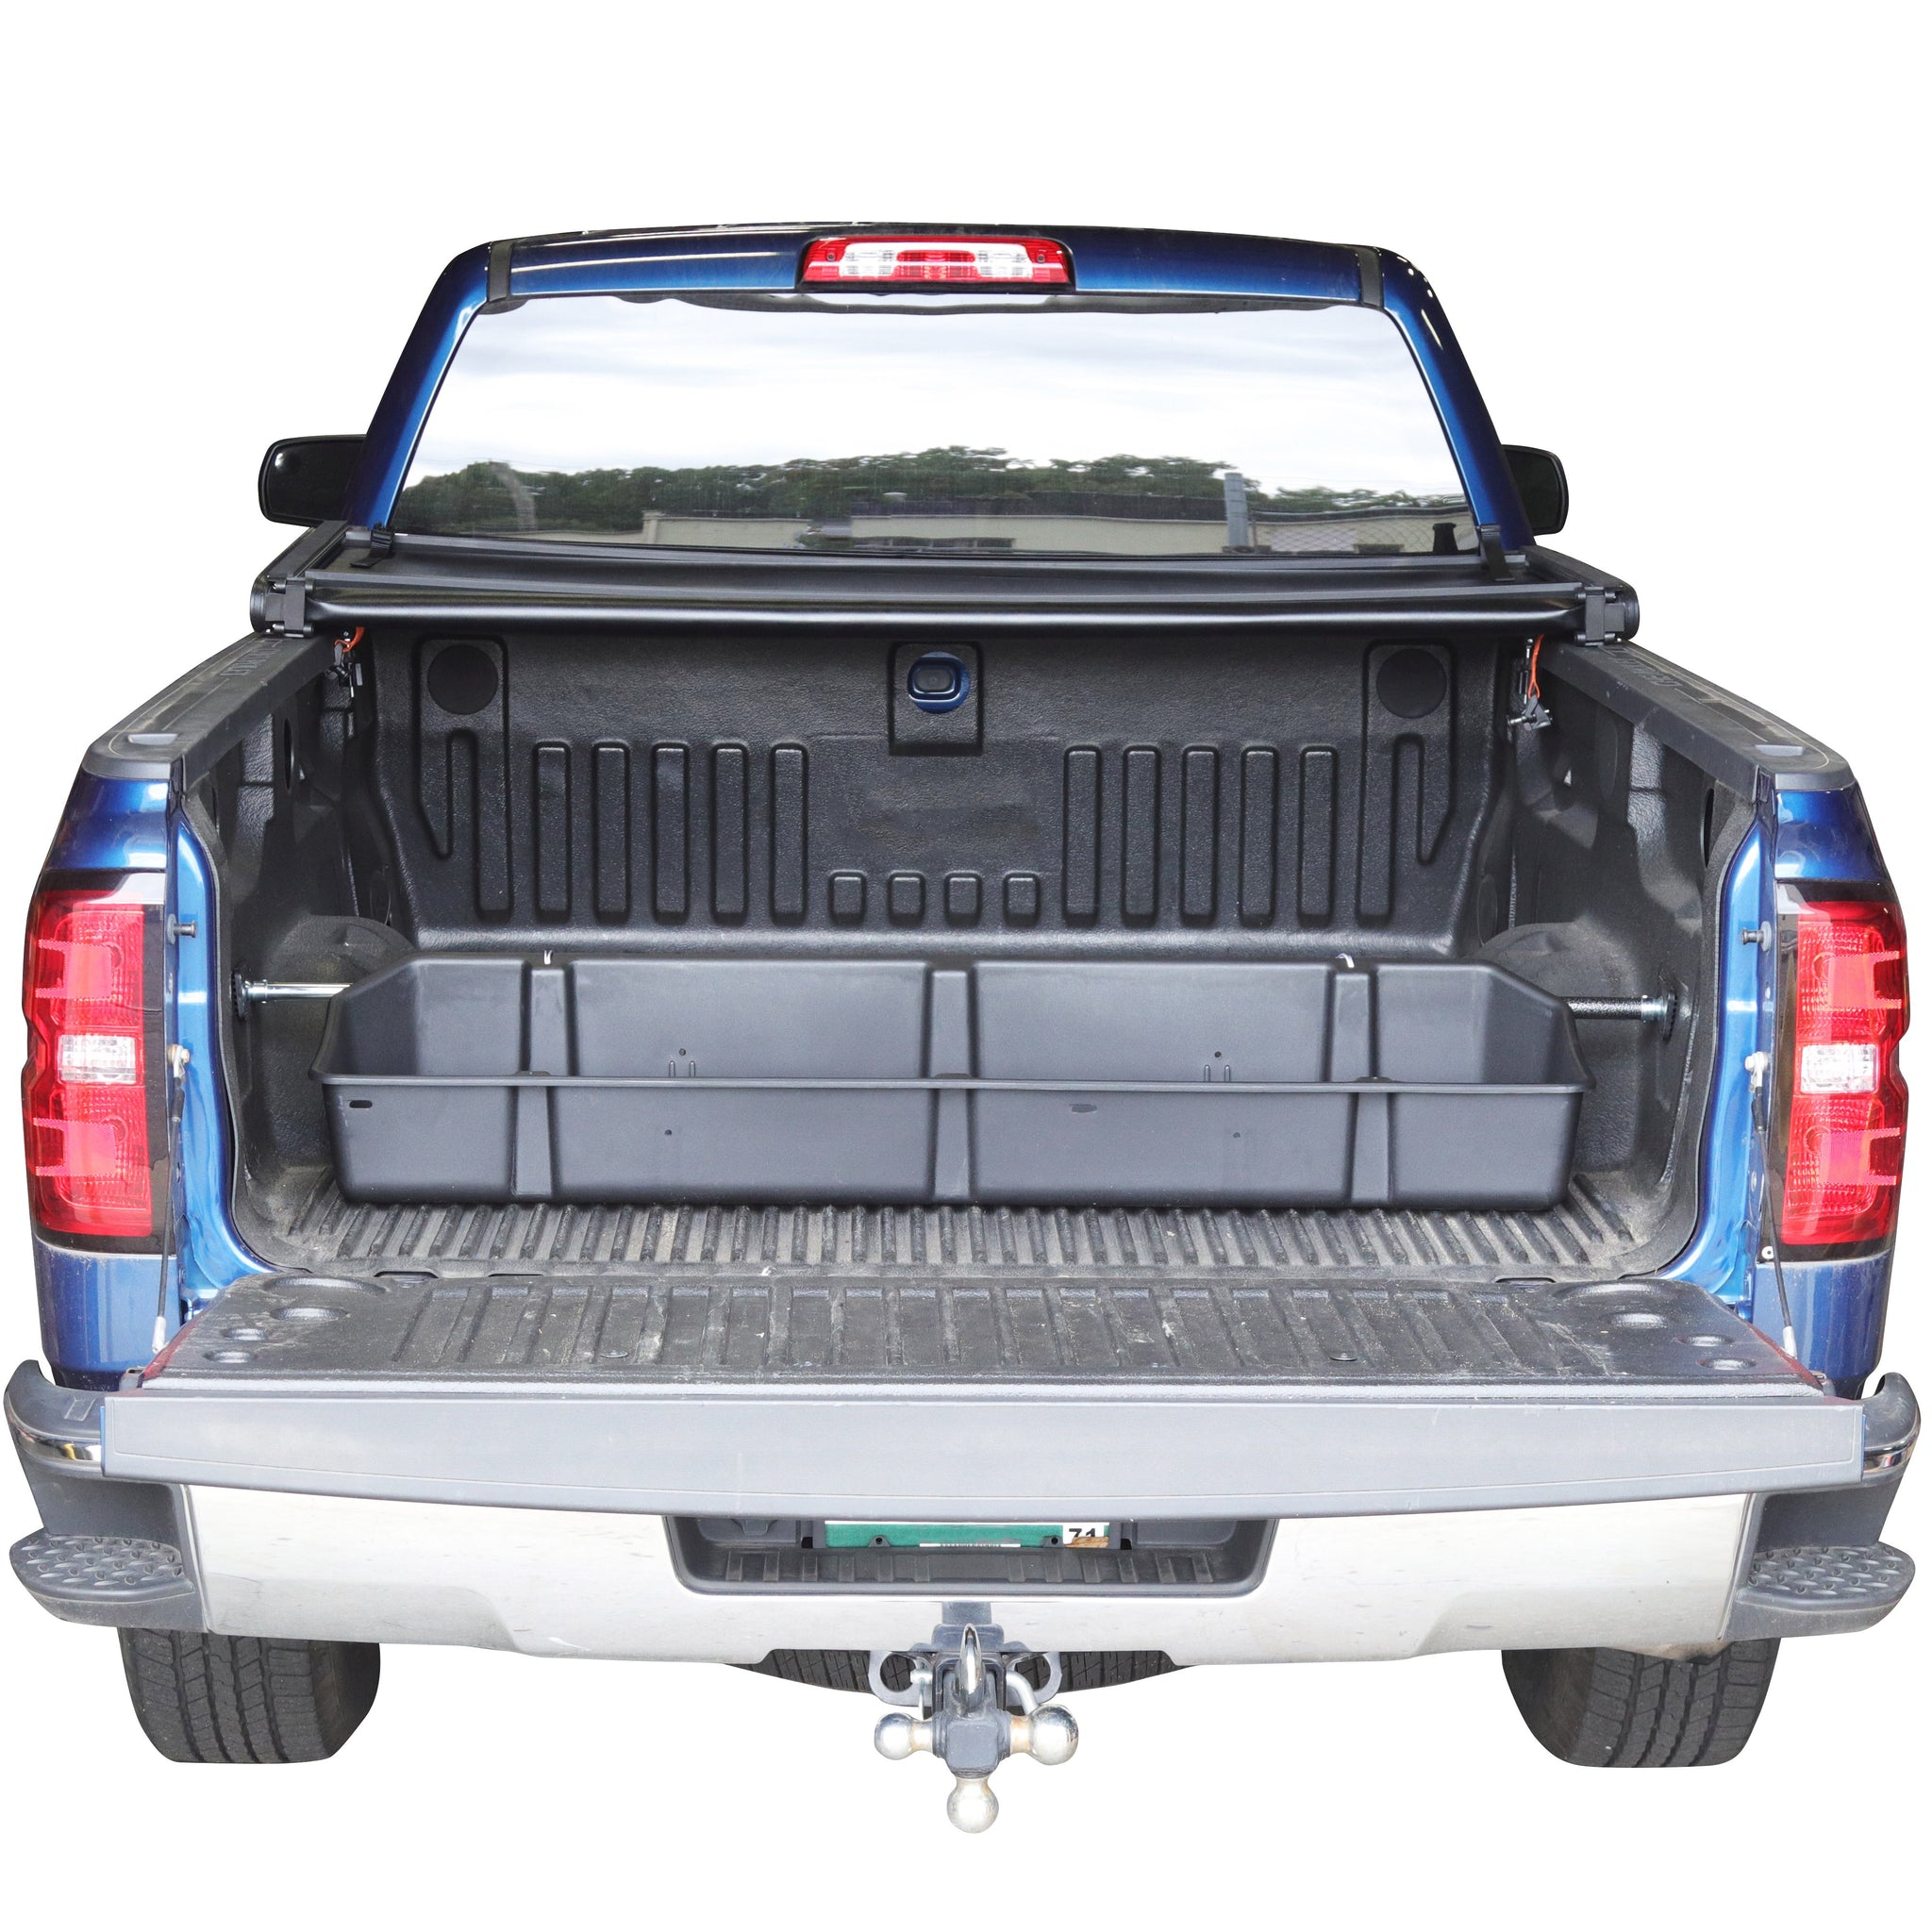 Red Hound Auto Truck Bed Storage Cargo Container Compatible with Chevrolet Chevy GMC Silverado Sierra 2014-2018 Transport Organizer with Secure Attachment System for Groceries Tools Golf Clubs More